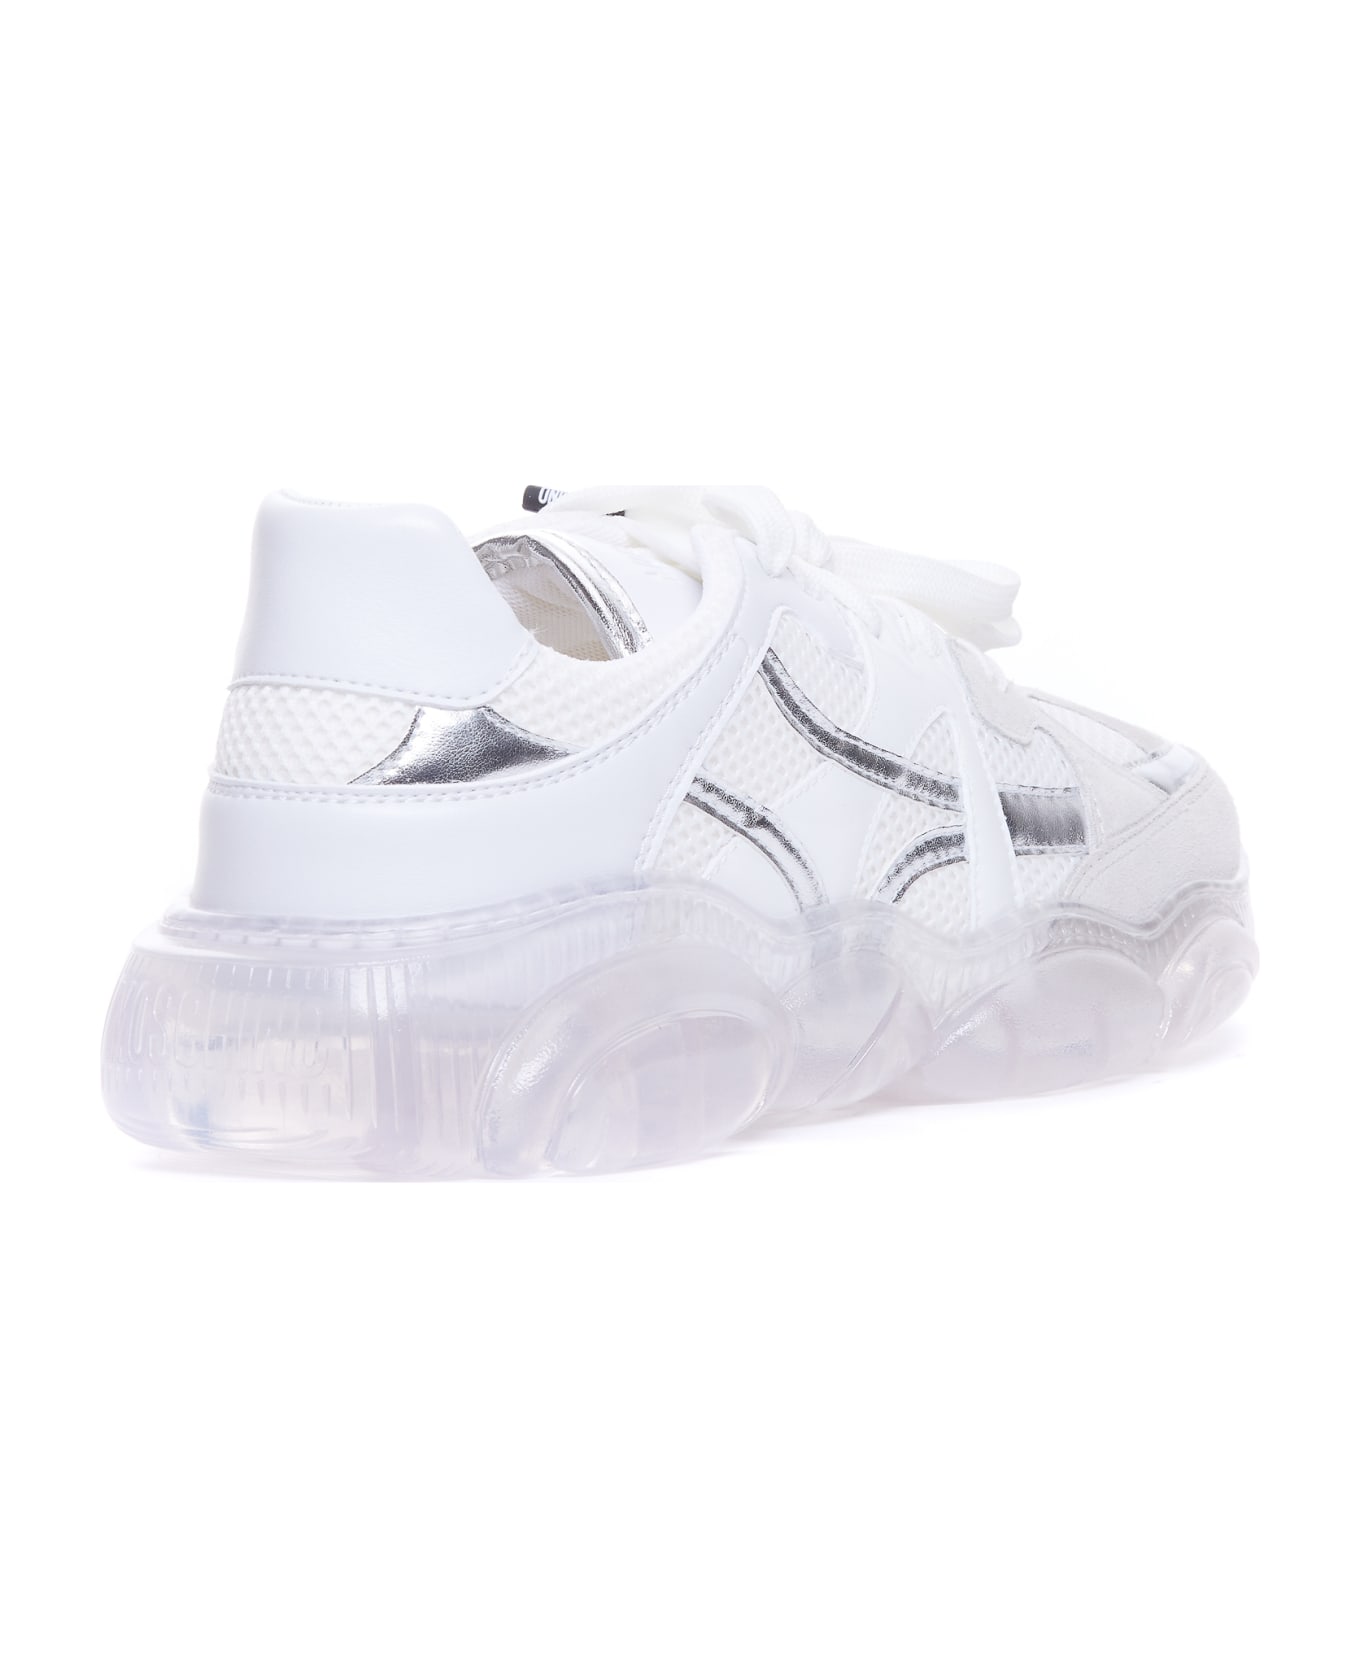 Moschino Teddy Shoes With Transparent Sole - White スニーカー